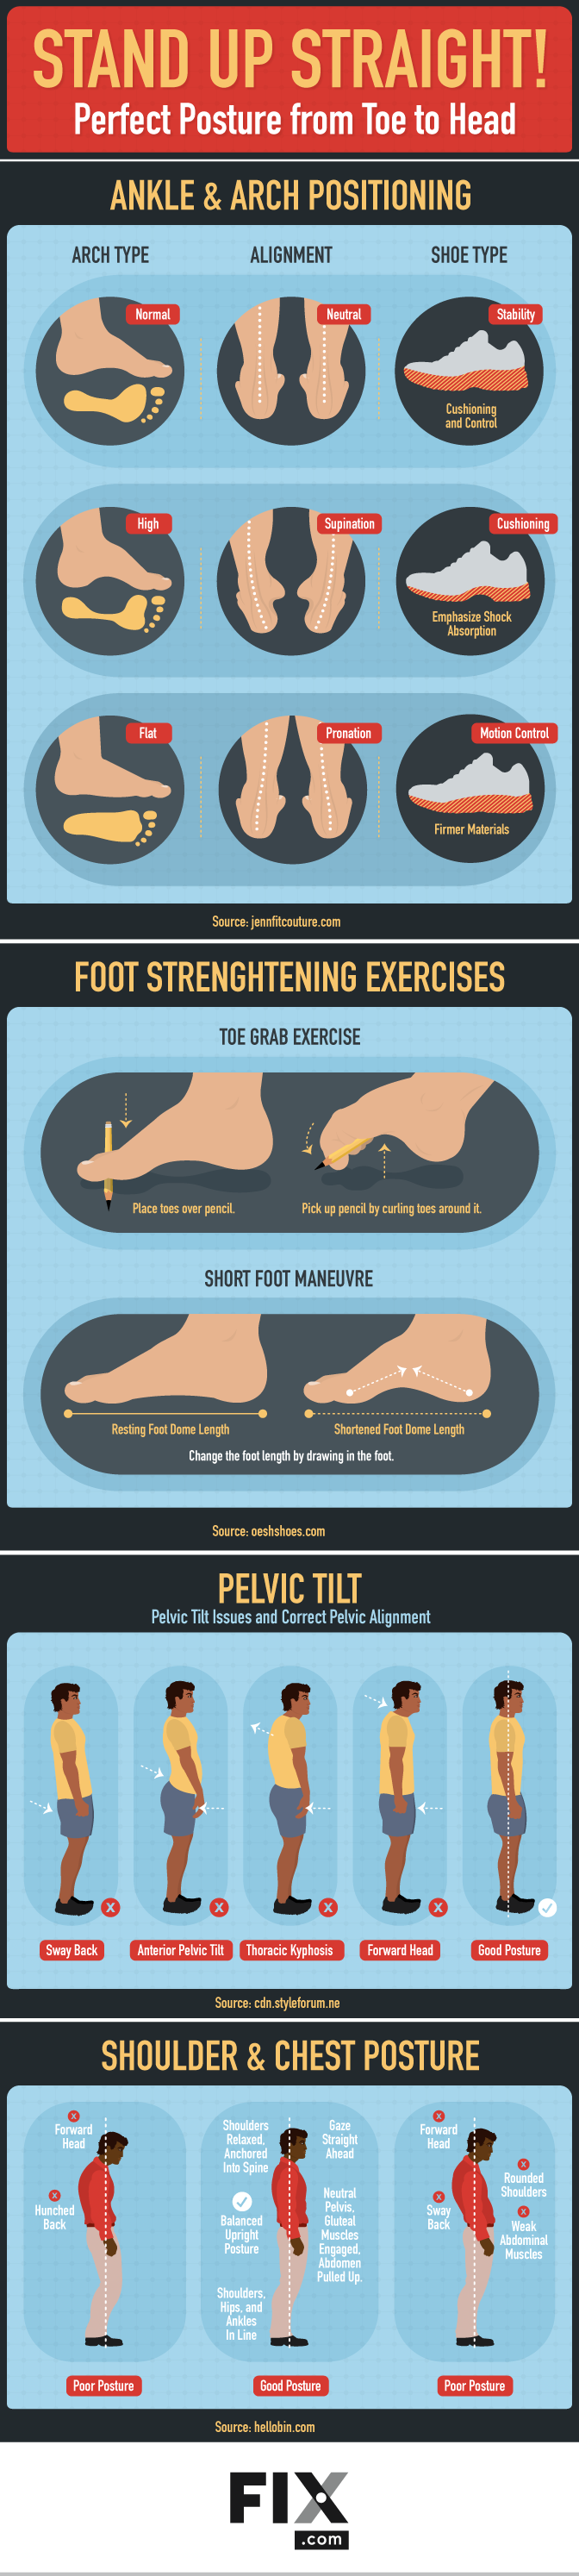 shoes good for your feet and posture